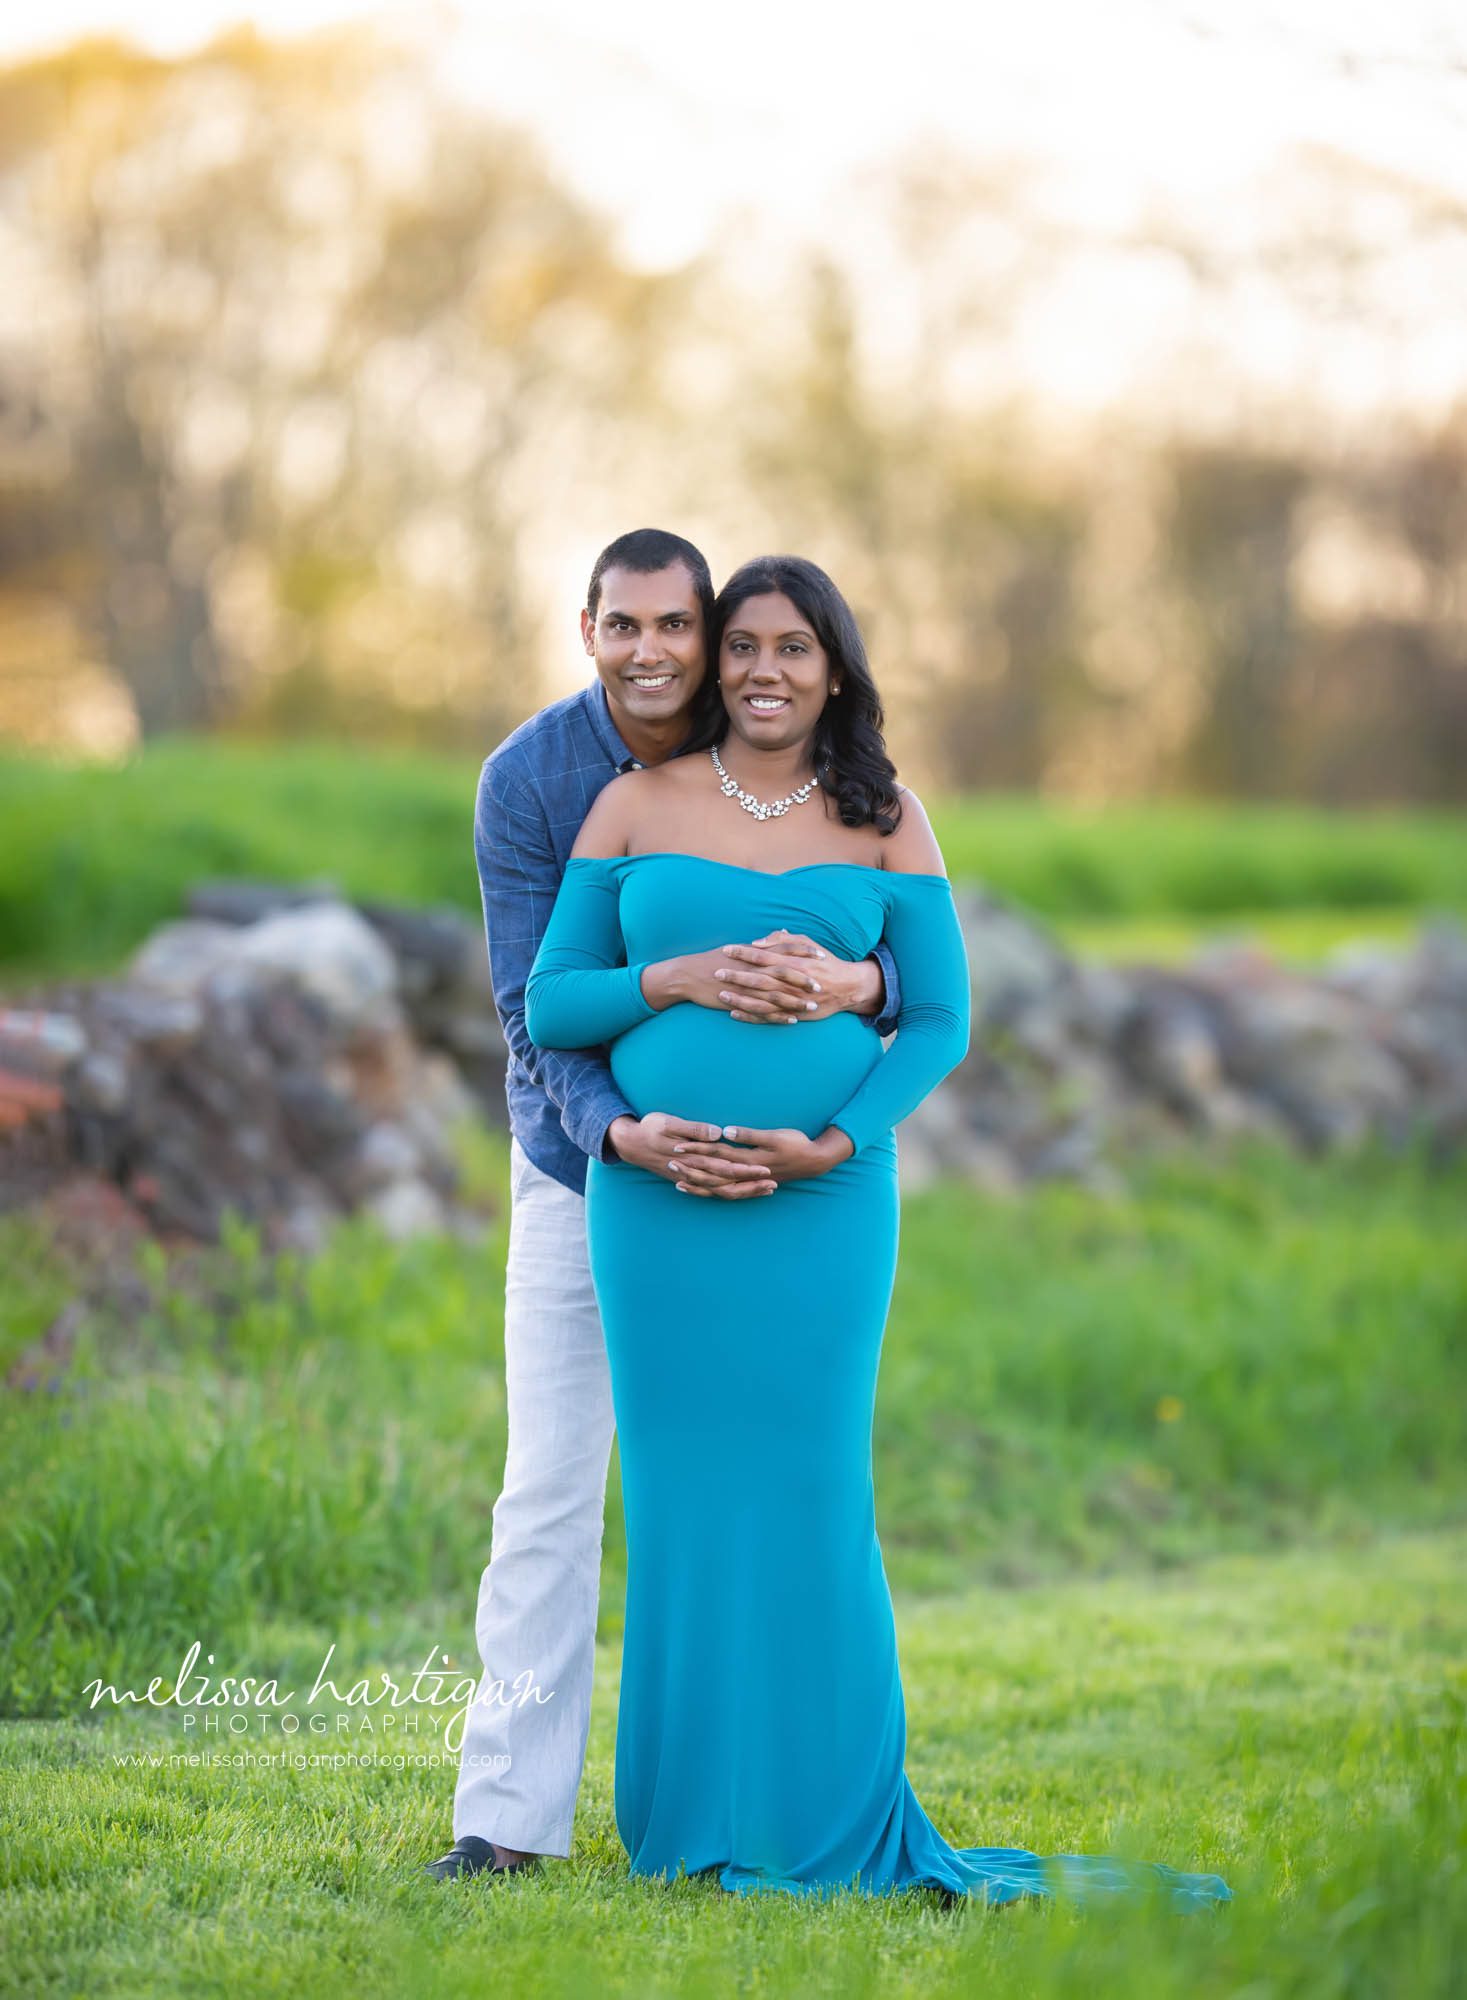 pregnant mom and dad holding baby bump standing maternity pose CT maternity photographer